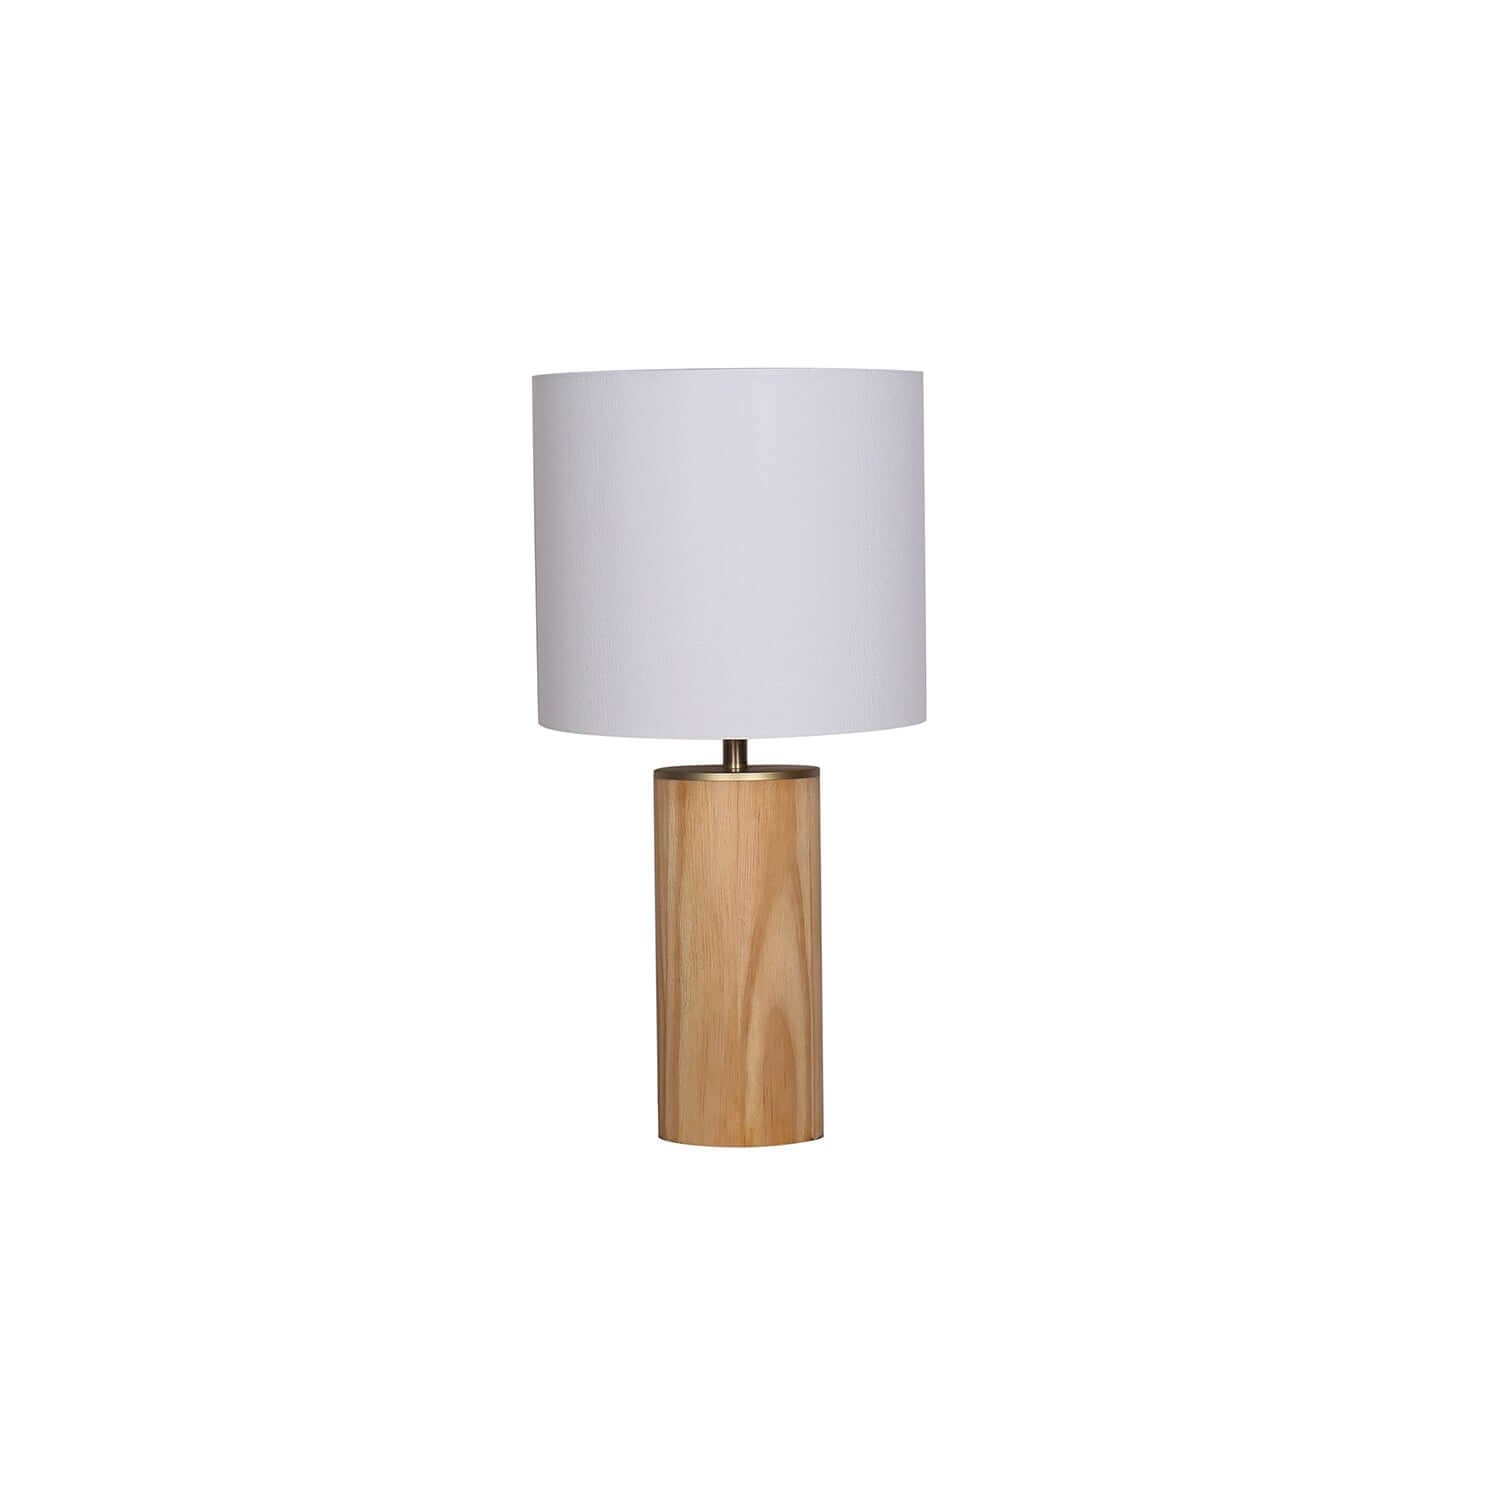 LAMP TABLE-WOODEN CYLINDER BASE-WHITE FABRIC SHADE